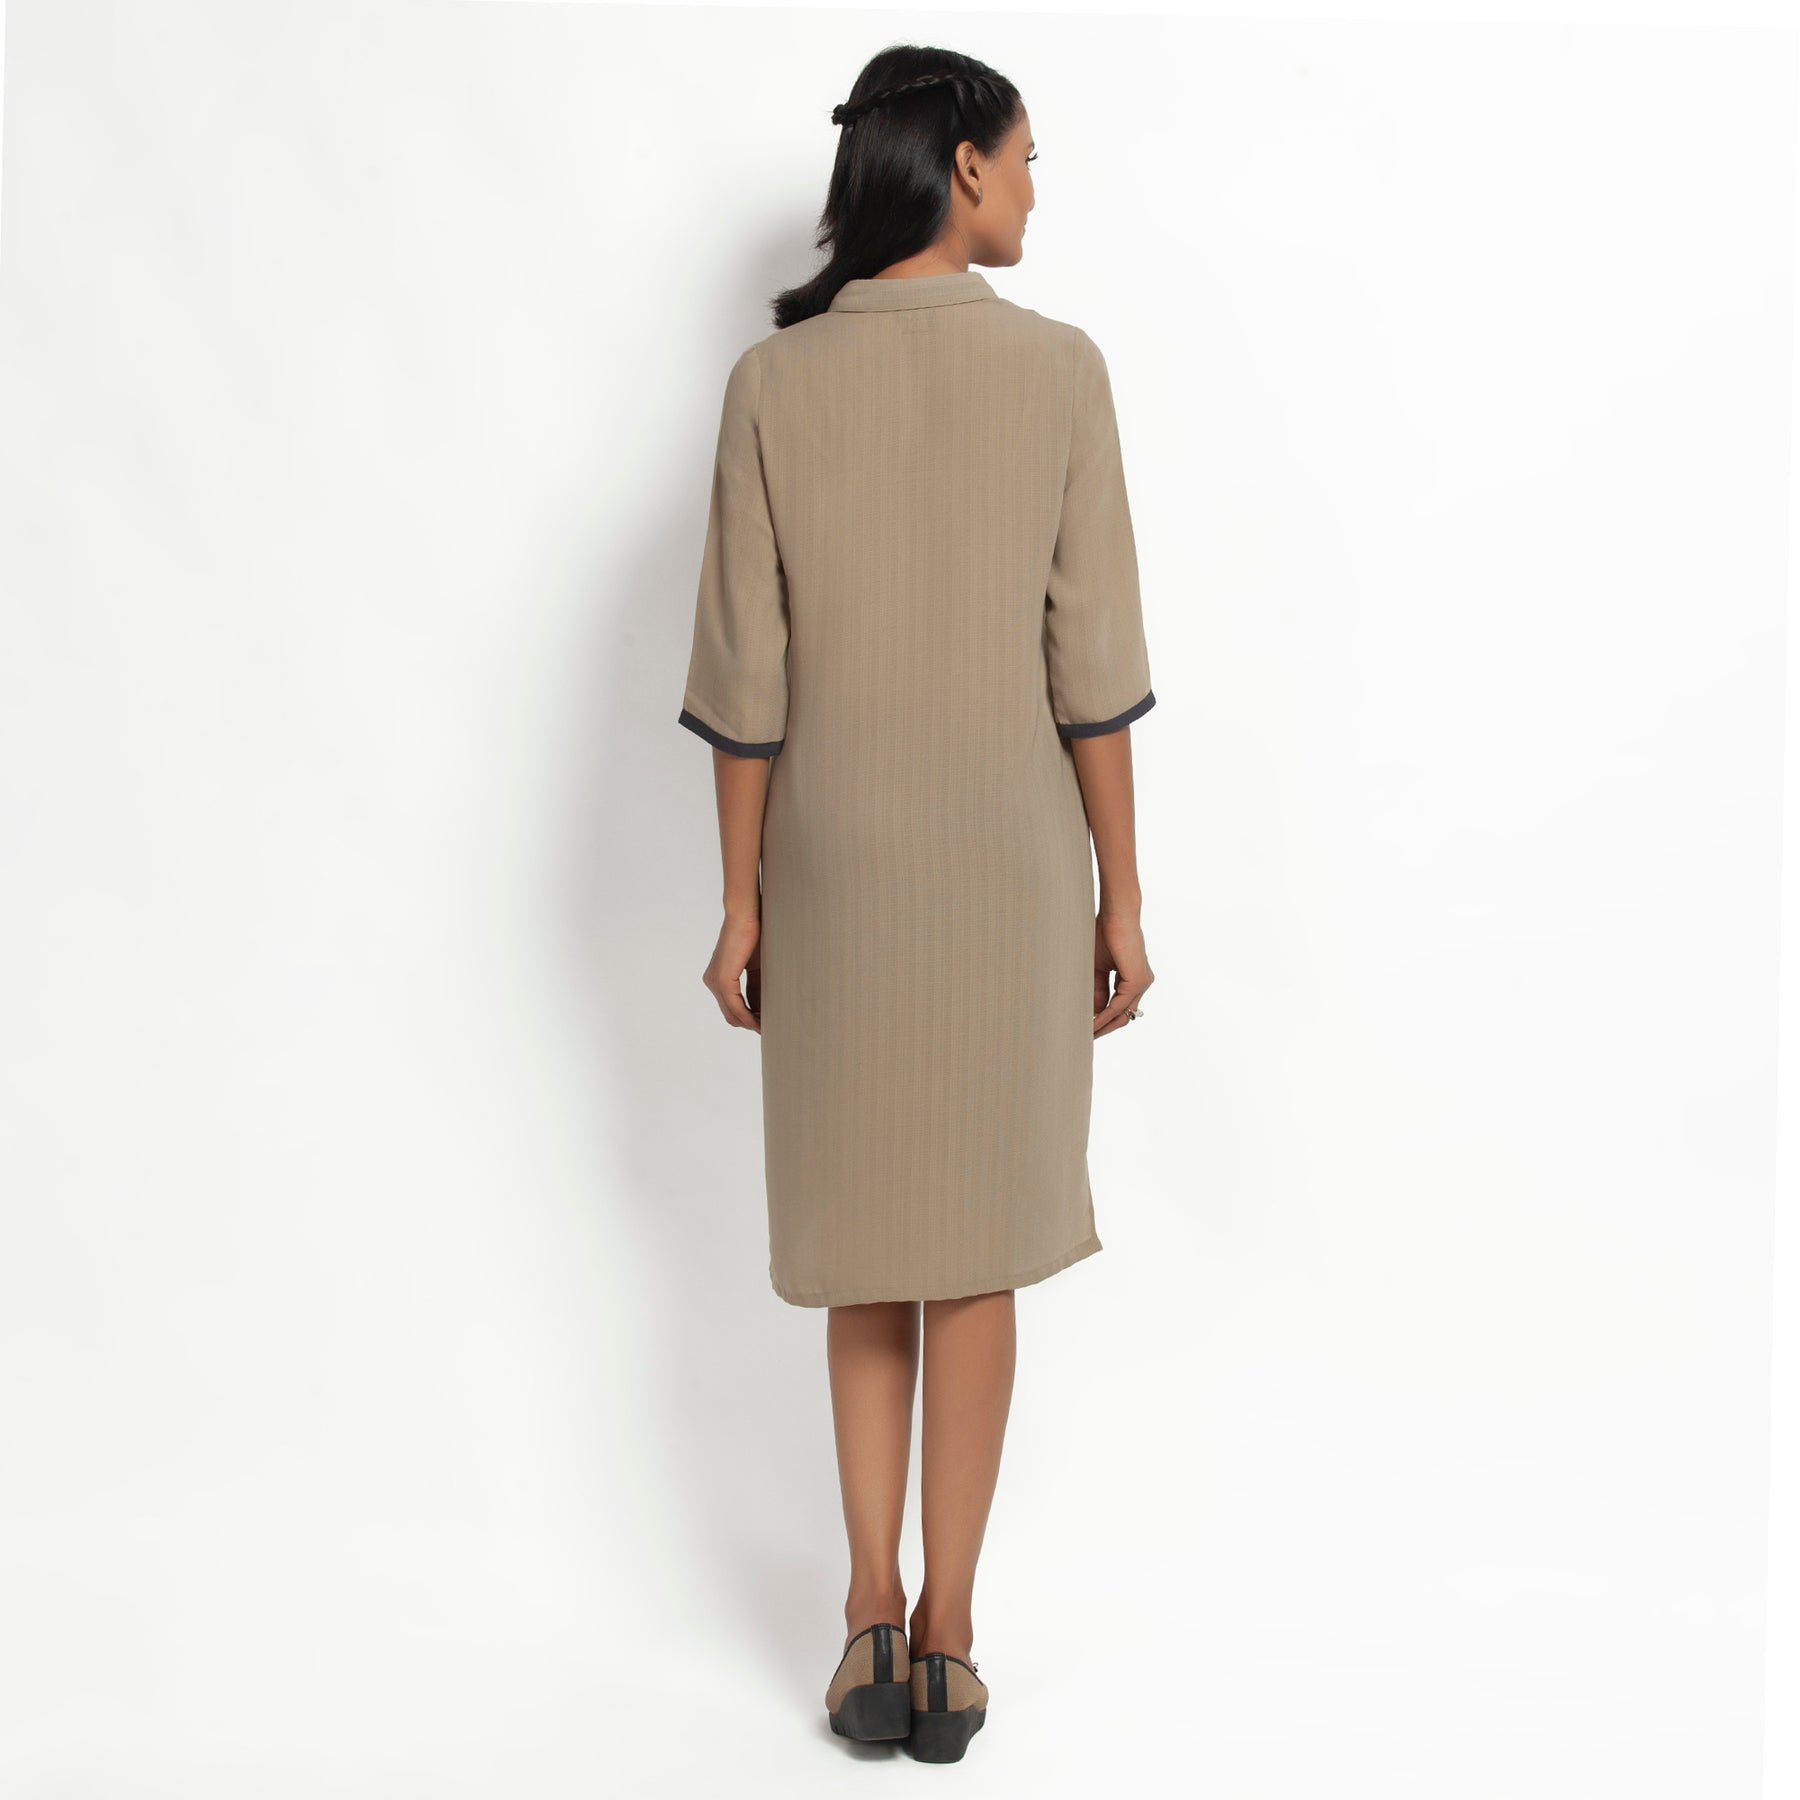 Beige Straight Tunic Jacket With Contrast Pocket